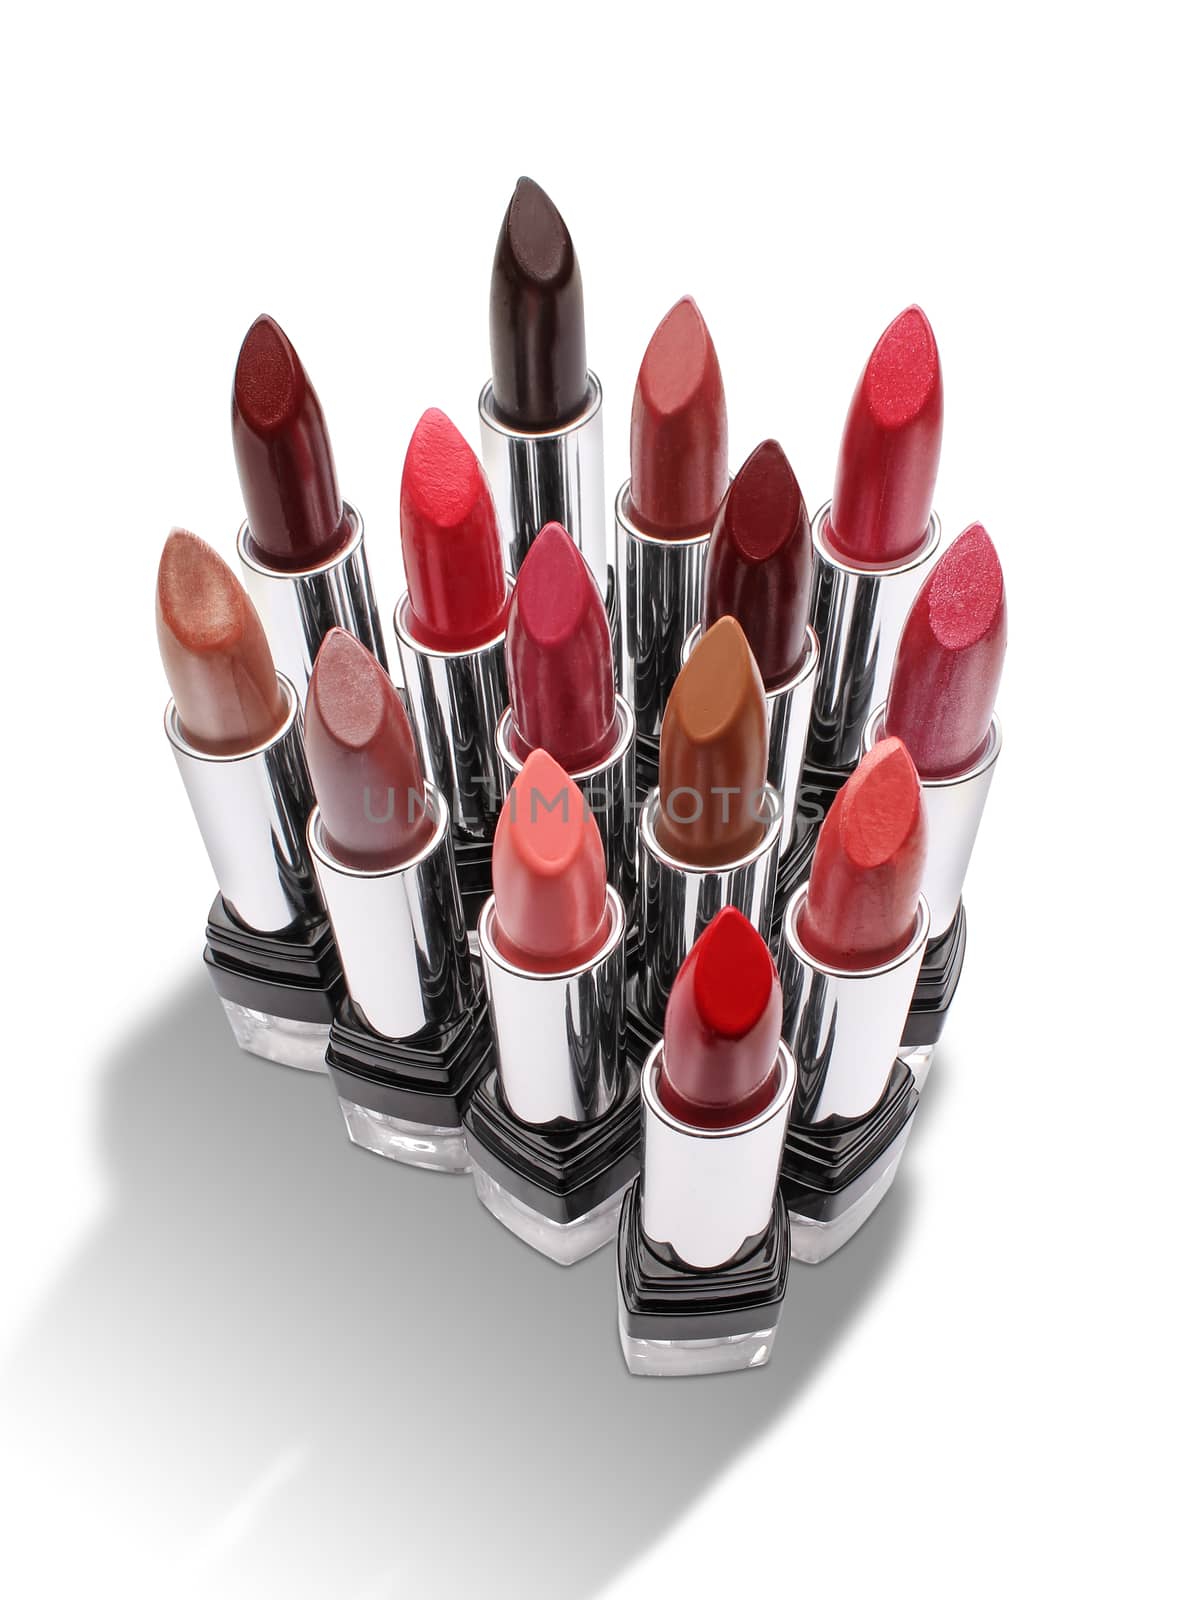 Group of colorful lipsticks isolated  by Erdosain